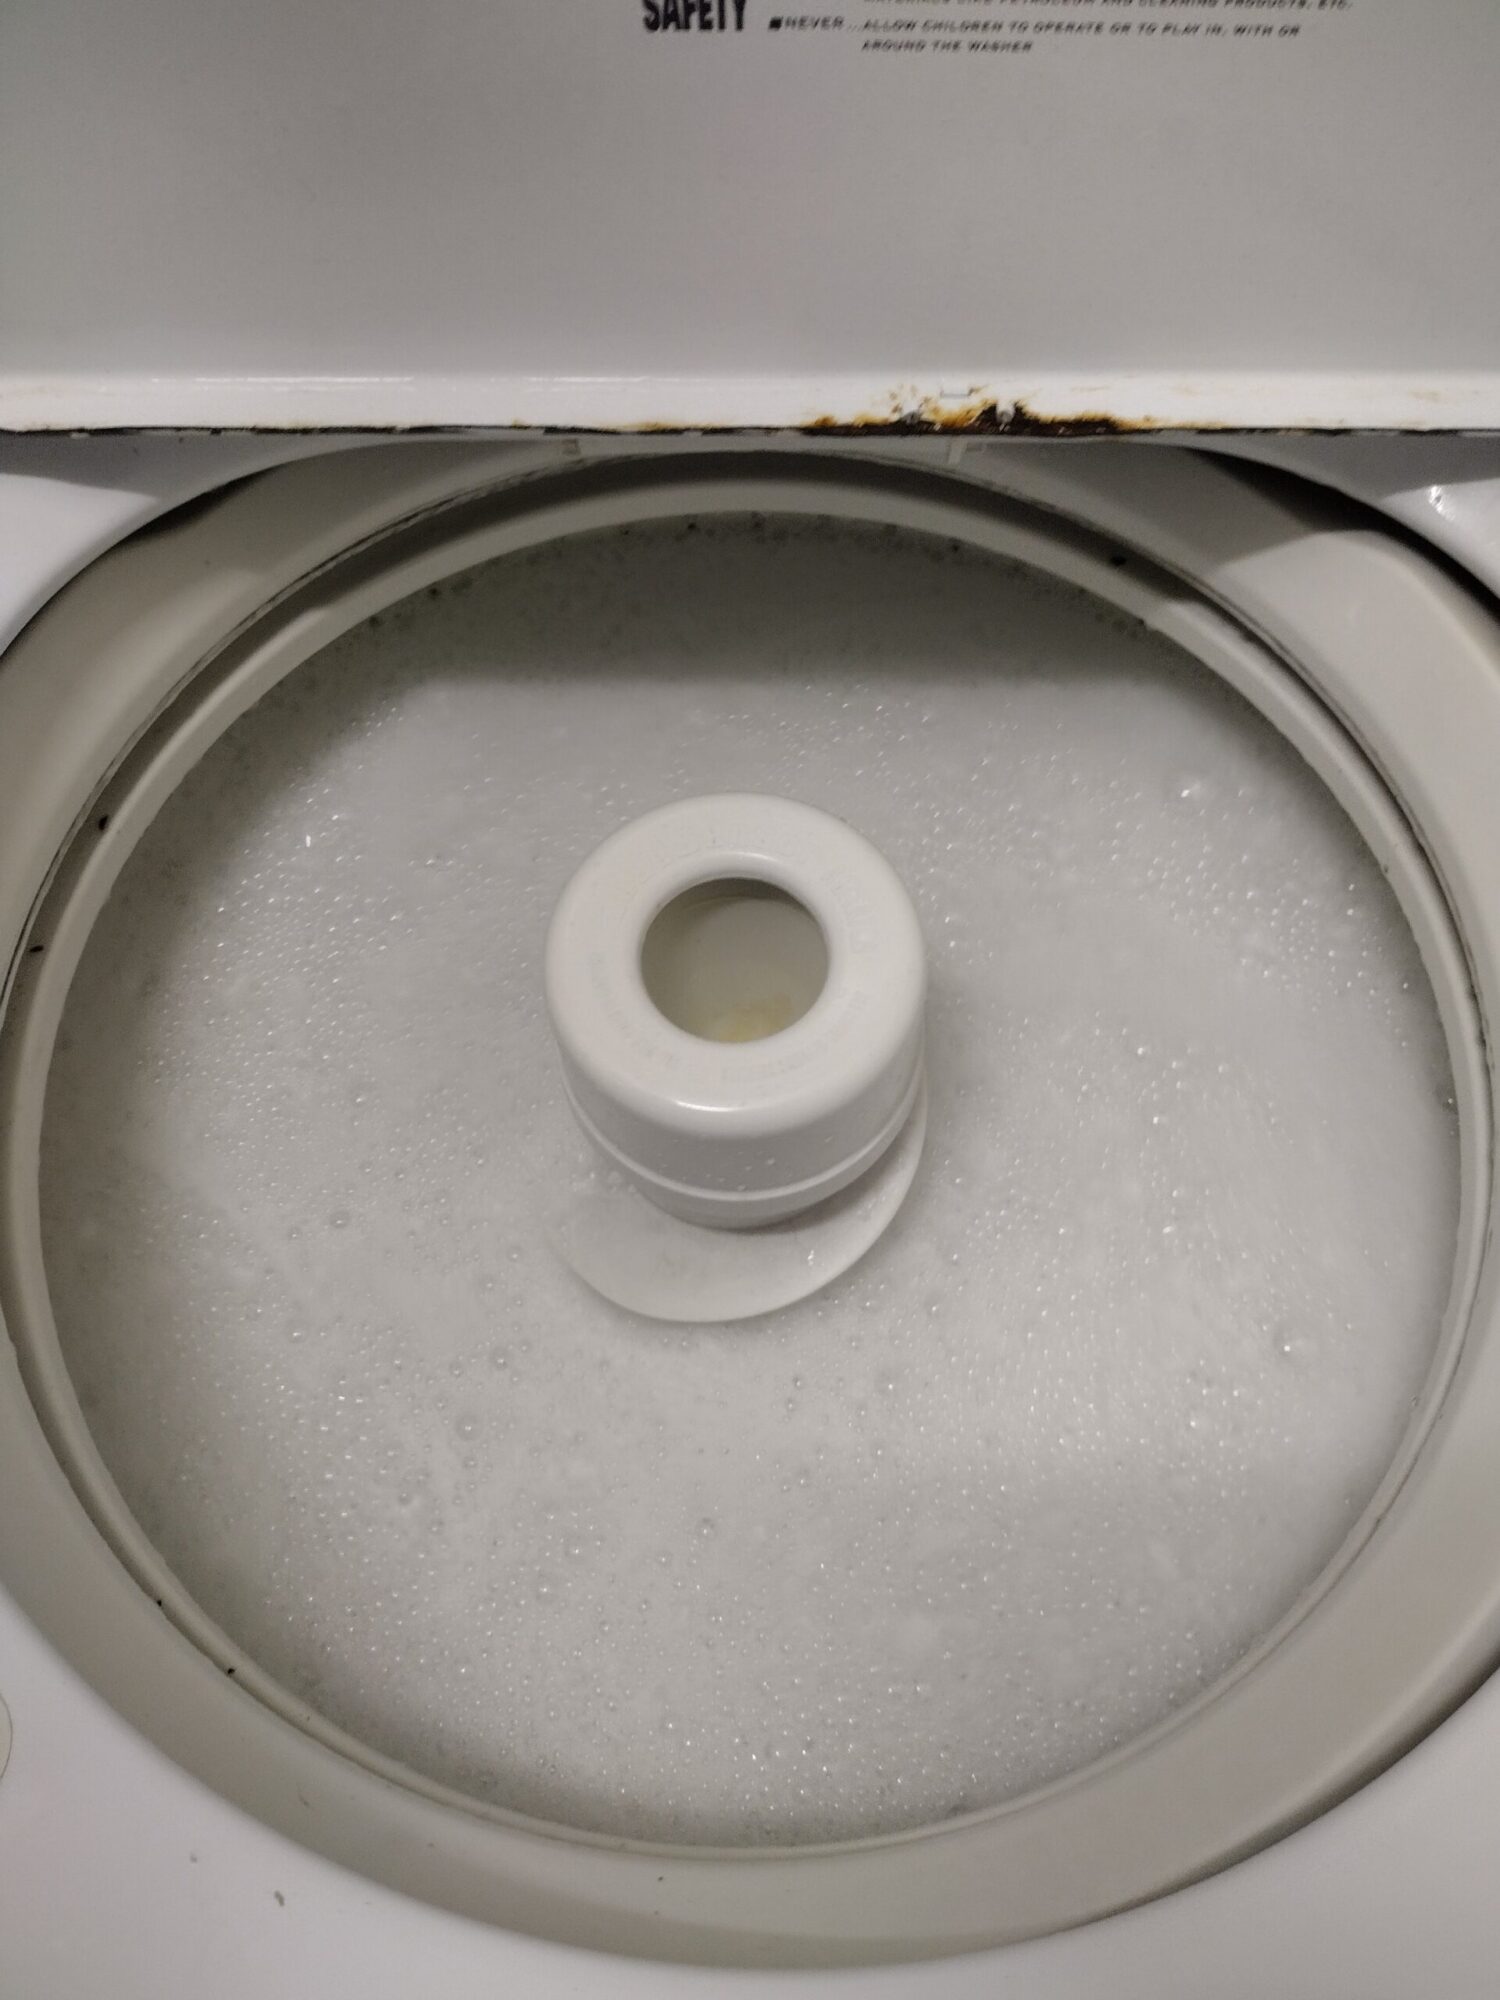 appliance repair washing machine repair flushed out tank with washer cleaner lemon st lady lake fl 32159